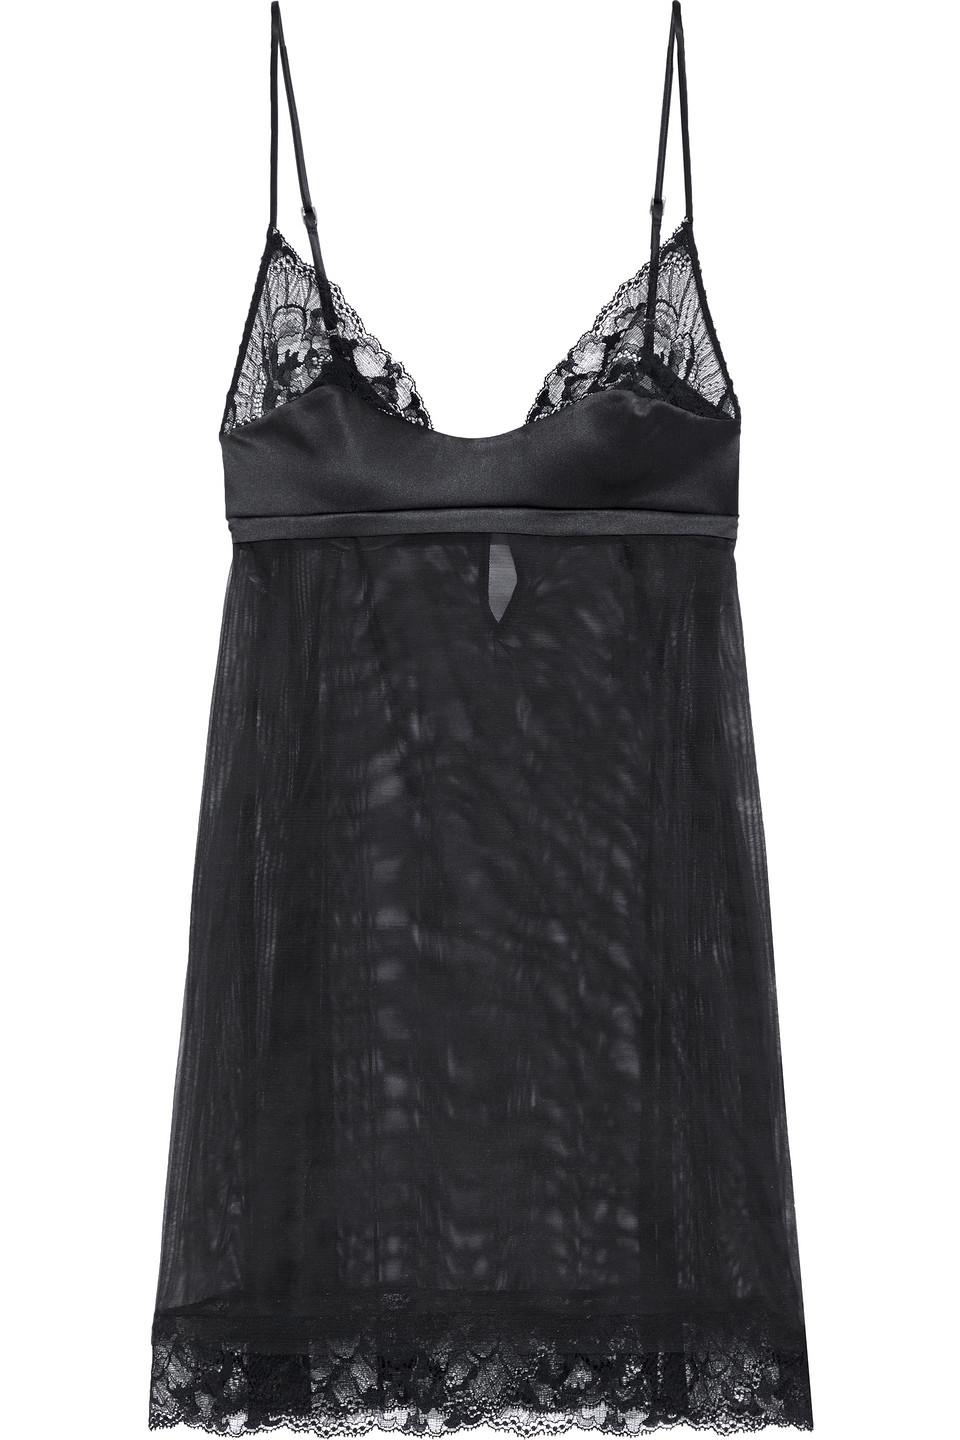 La Perla Adele Satin And Lace-trimmed Stretch-tulle Chemise in Black | Lyst